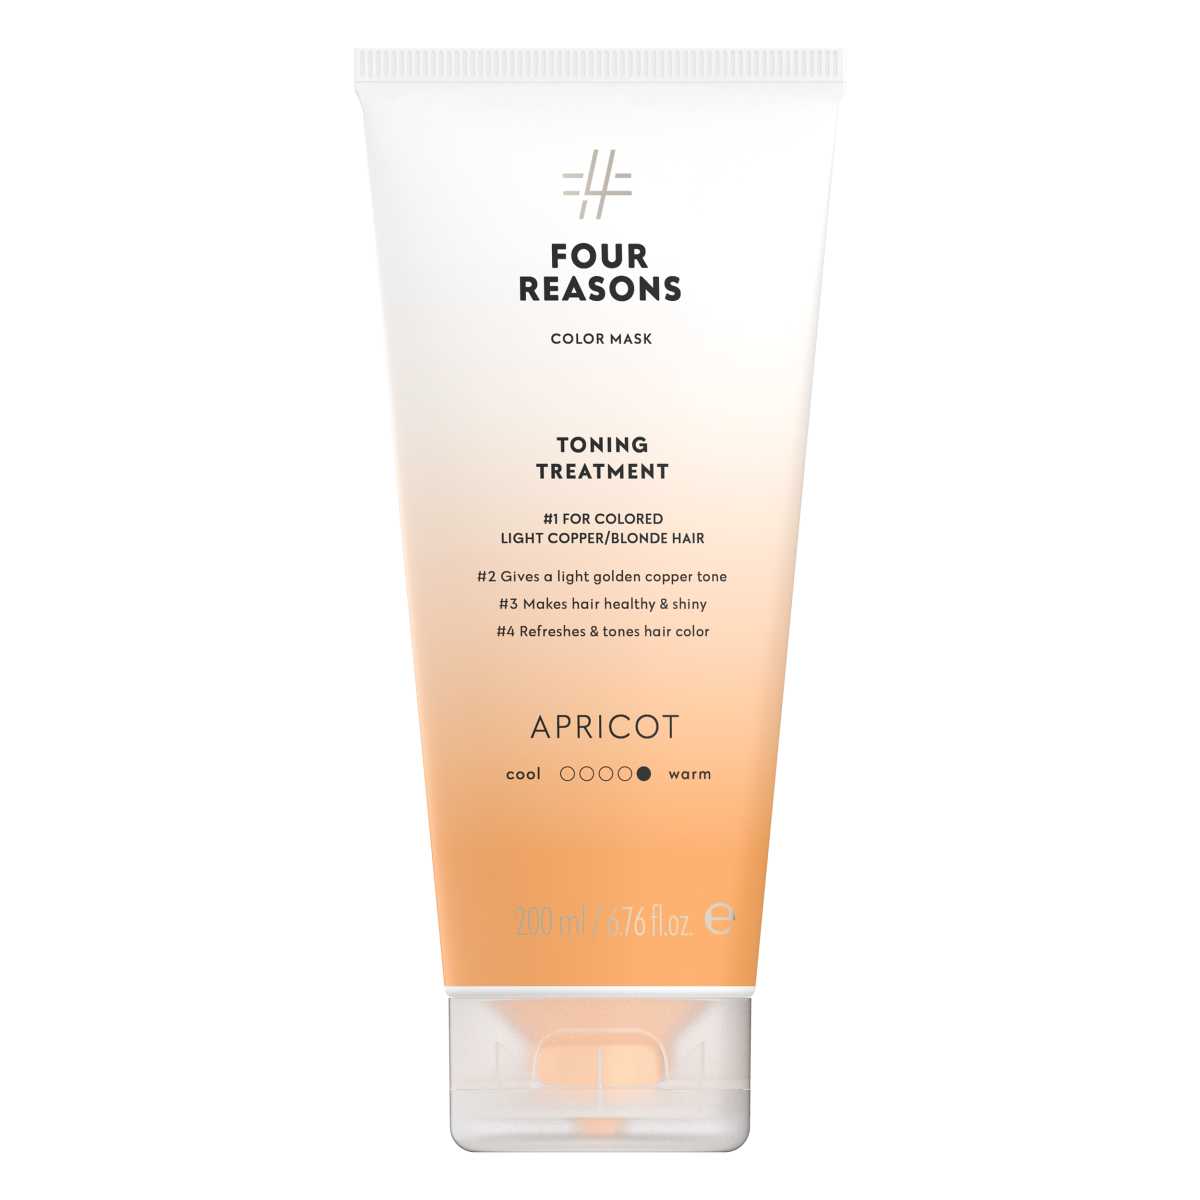 Toning Treatment Apricot A Toning Intensive Treatment For